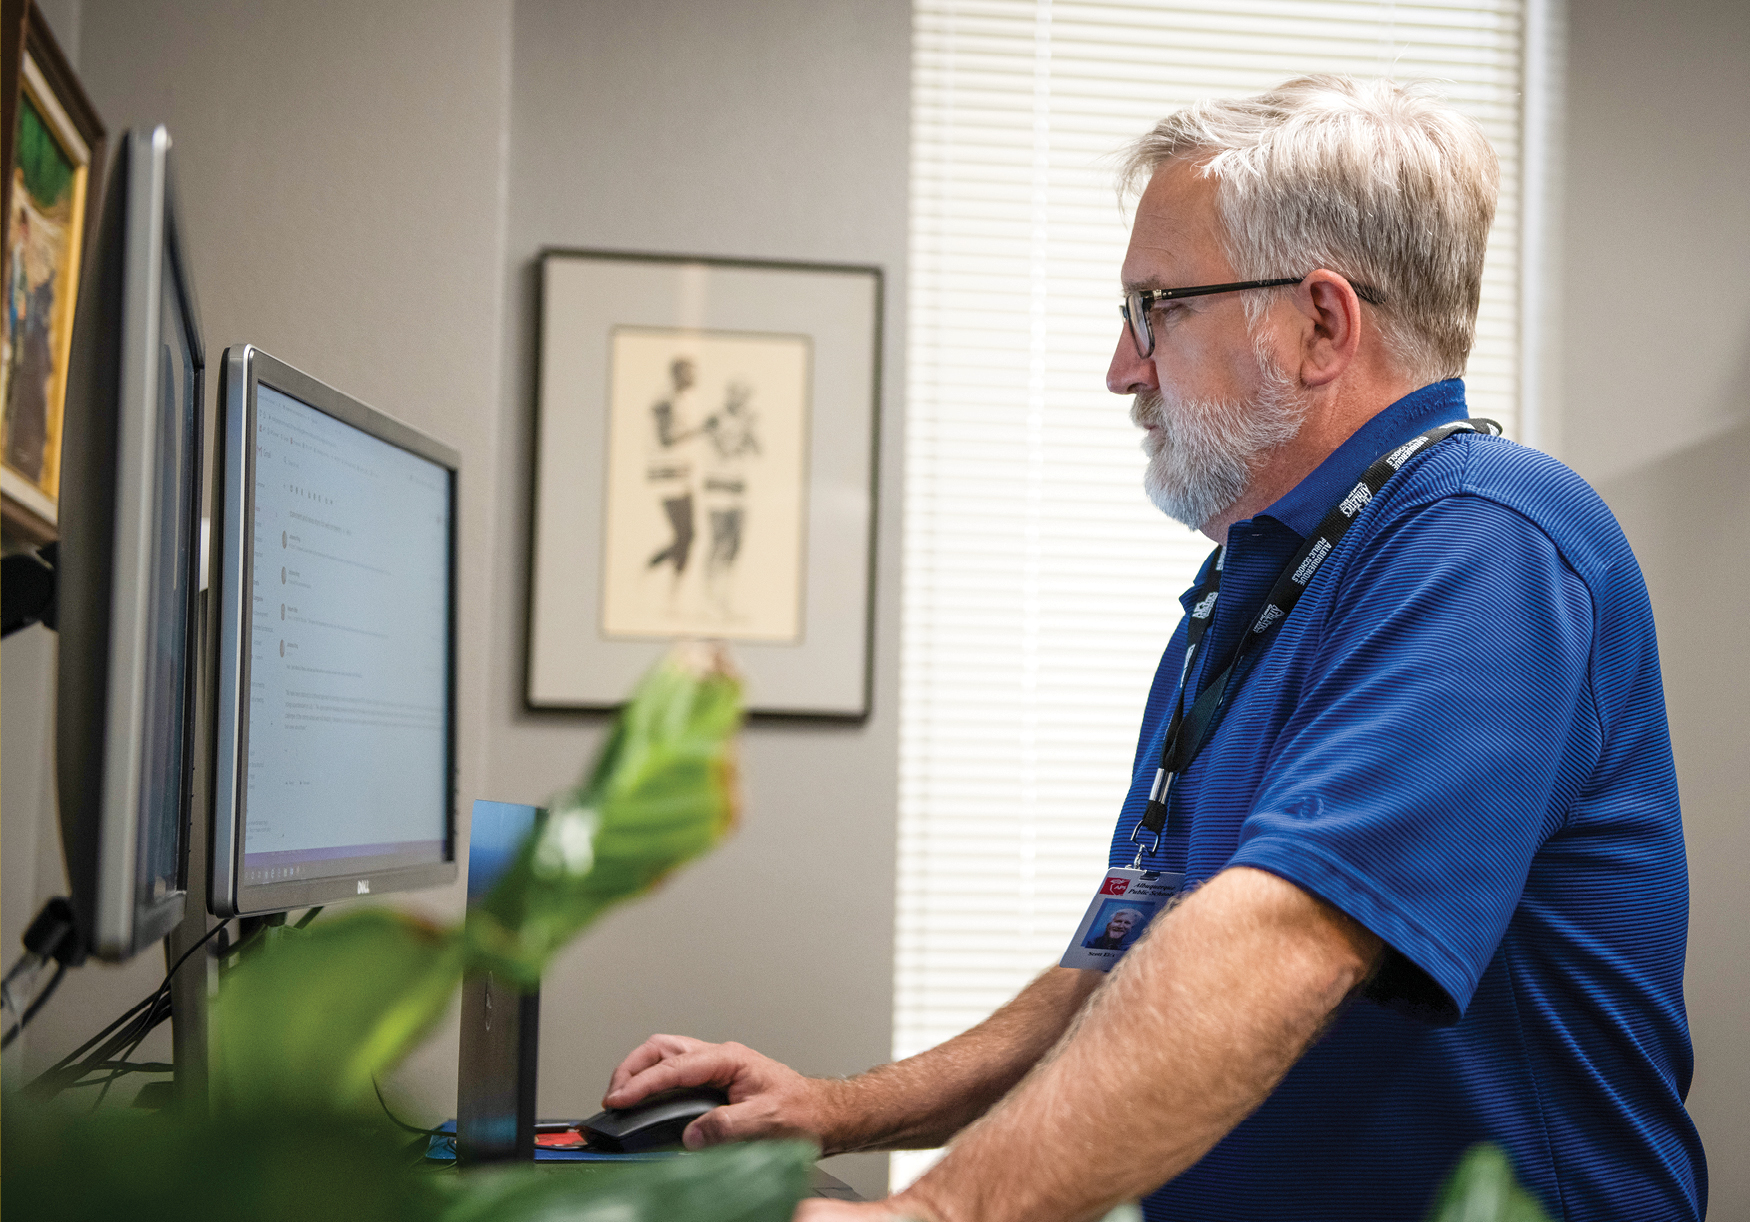 Scott Elder, a white man with gray hair and beard wearing a blue shirt and working on his computer